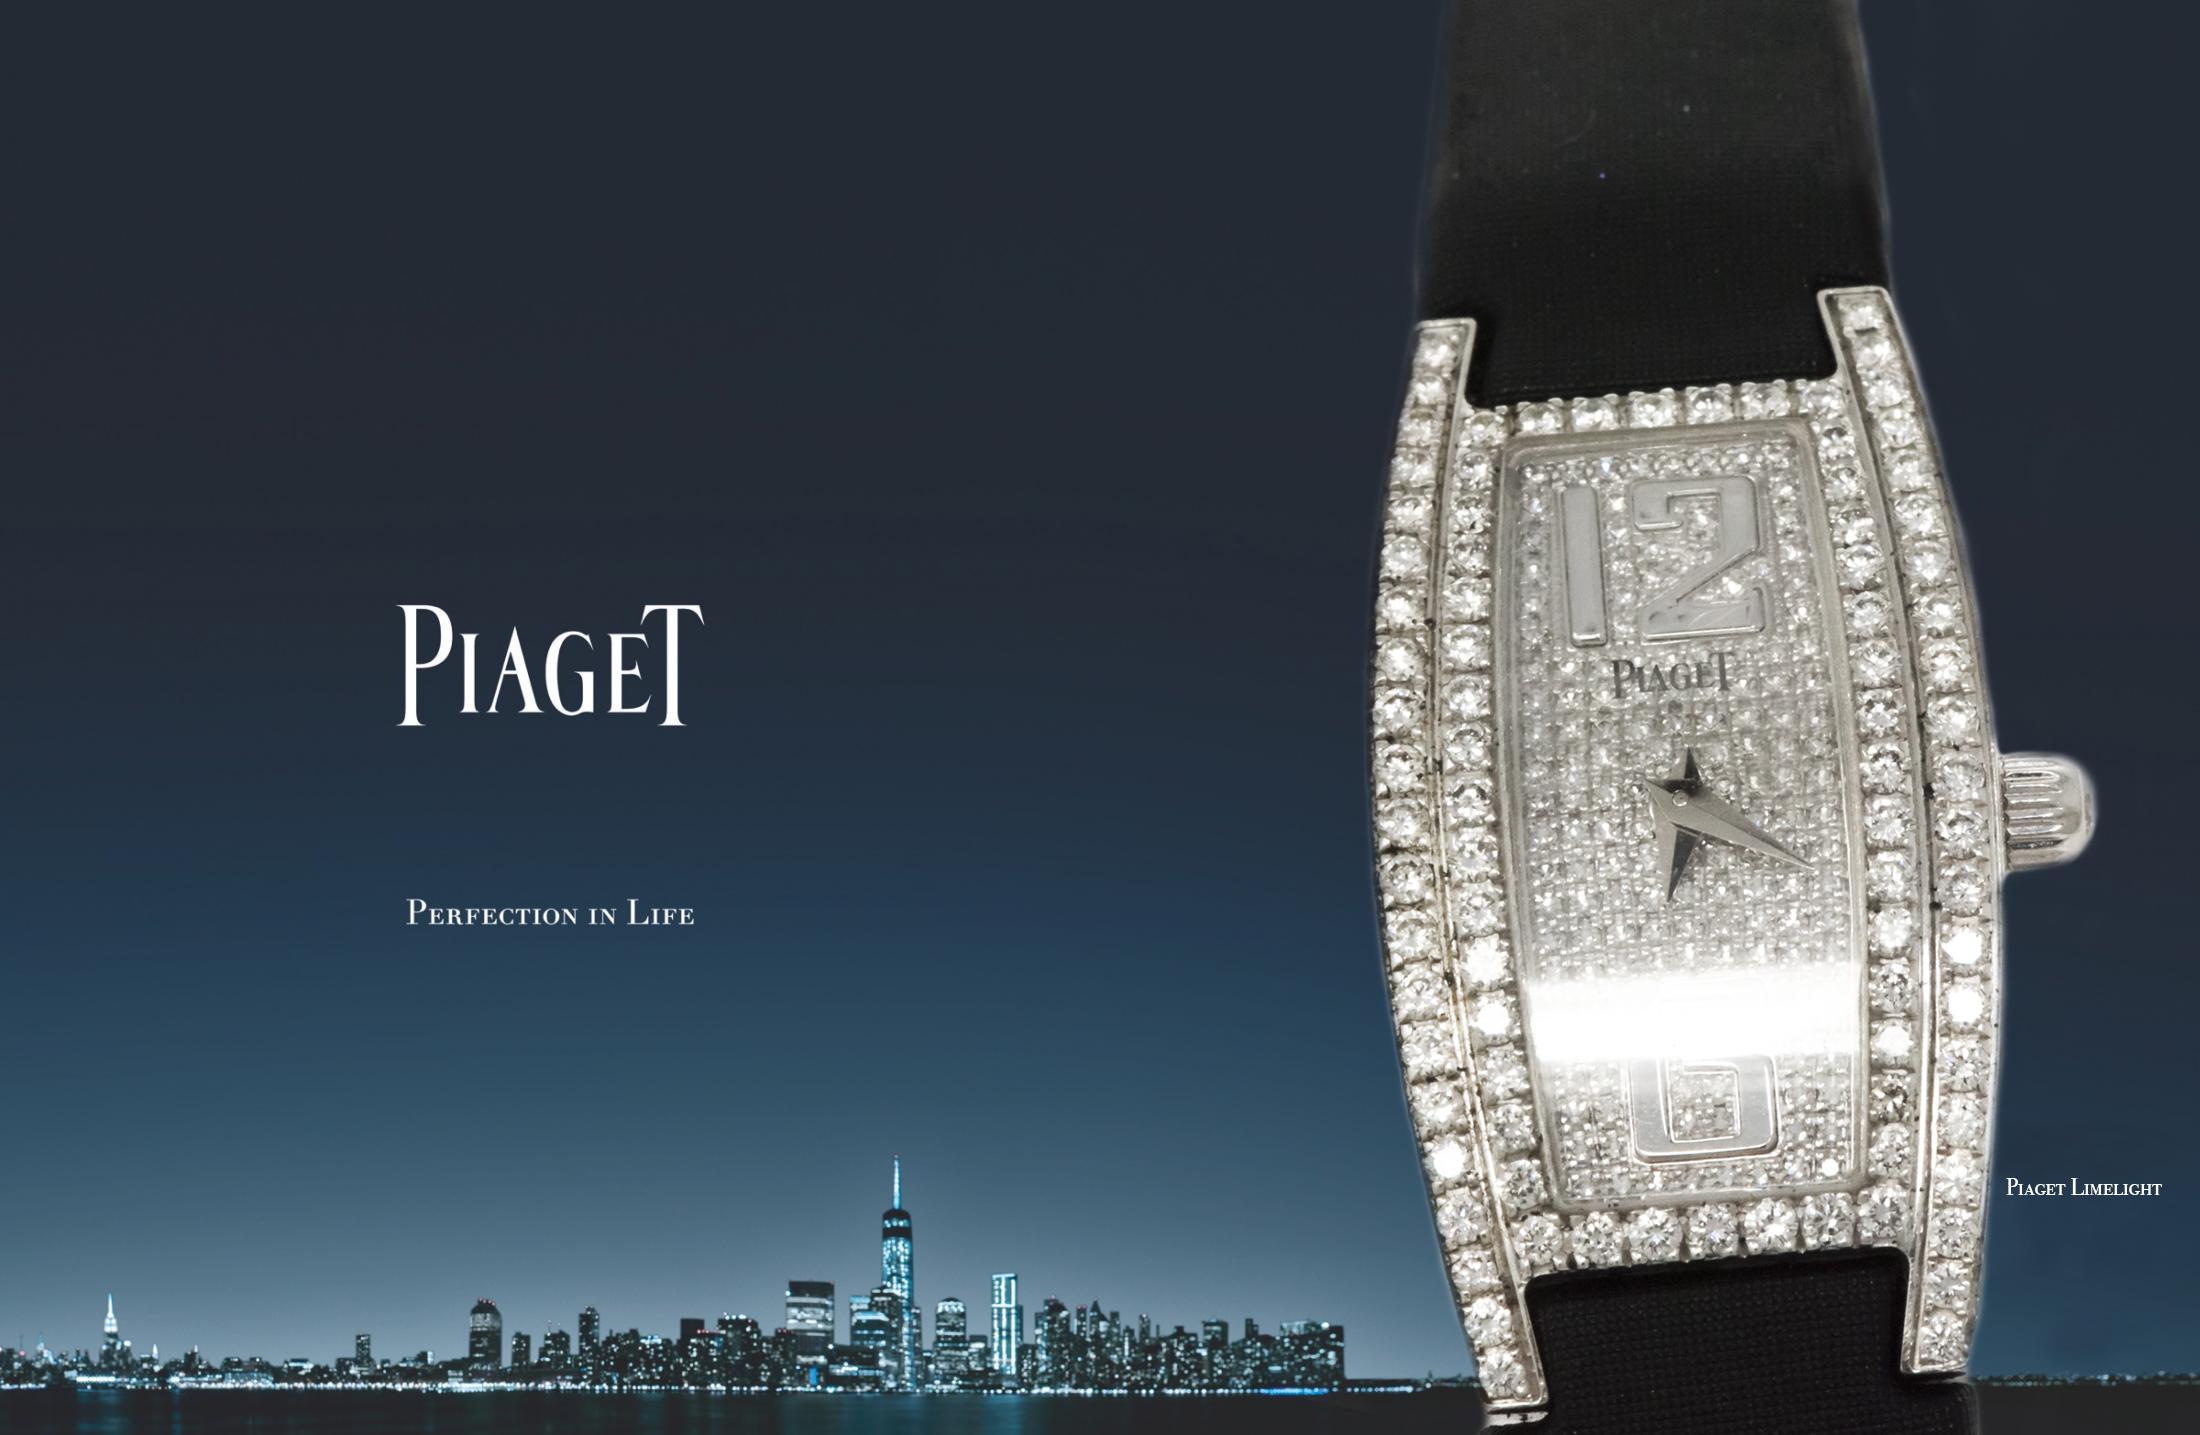 The present watch is a very limited production of under 50 pieces made and had an original retail of $80,000.00 circa 1980s and one one of their largest diamond wrist case designs..

It is made in 18kt white gold and 100% original factory set pave